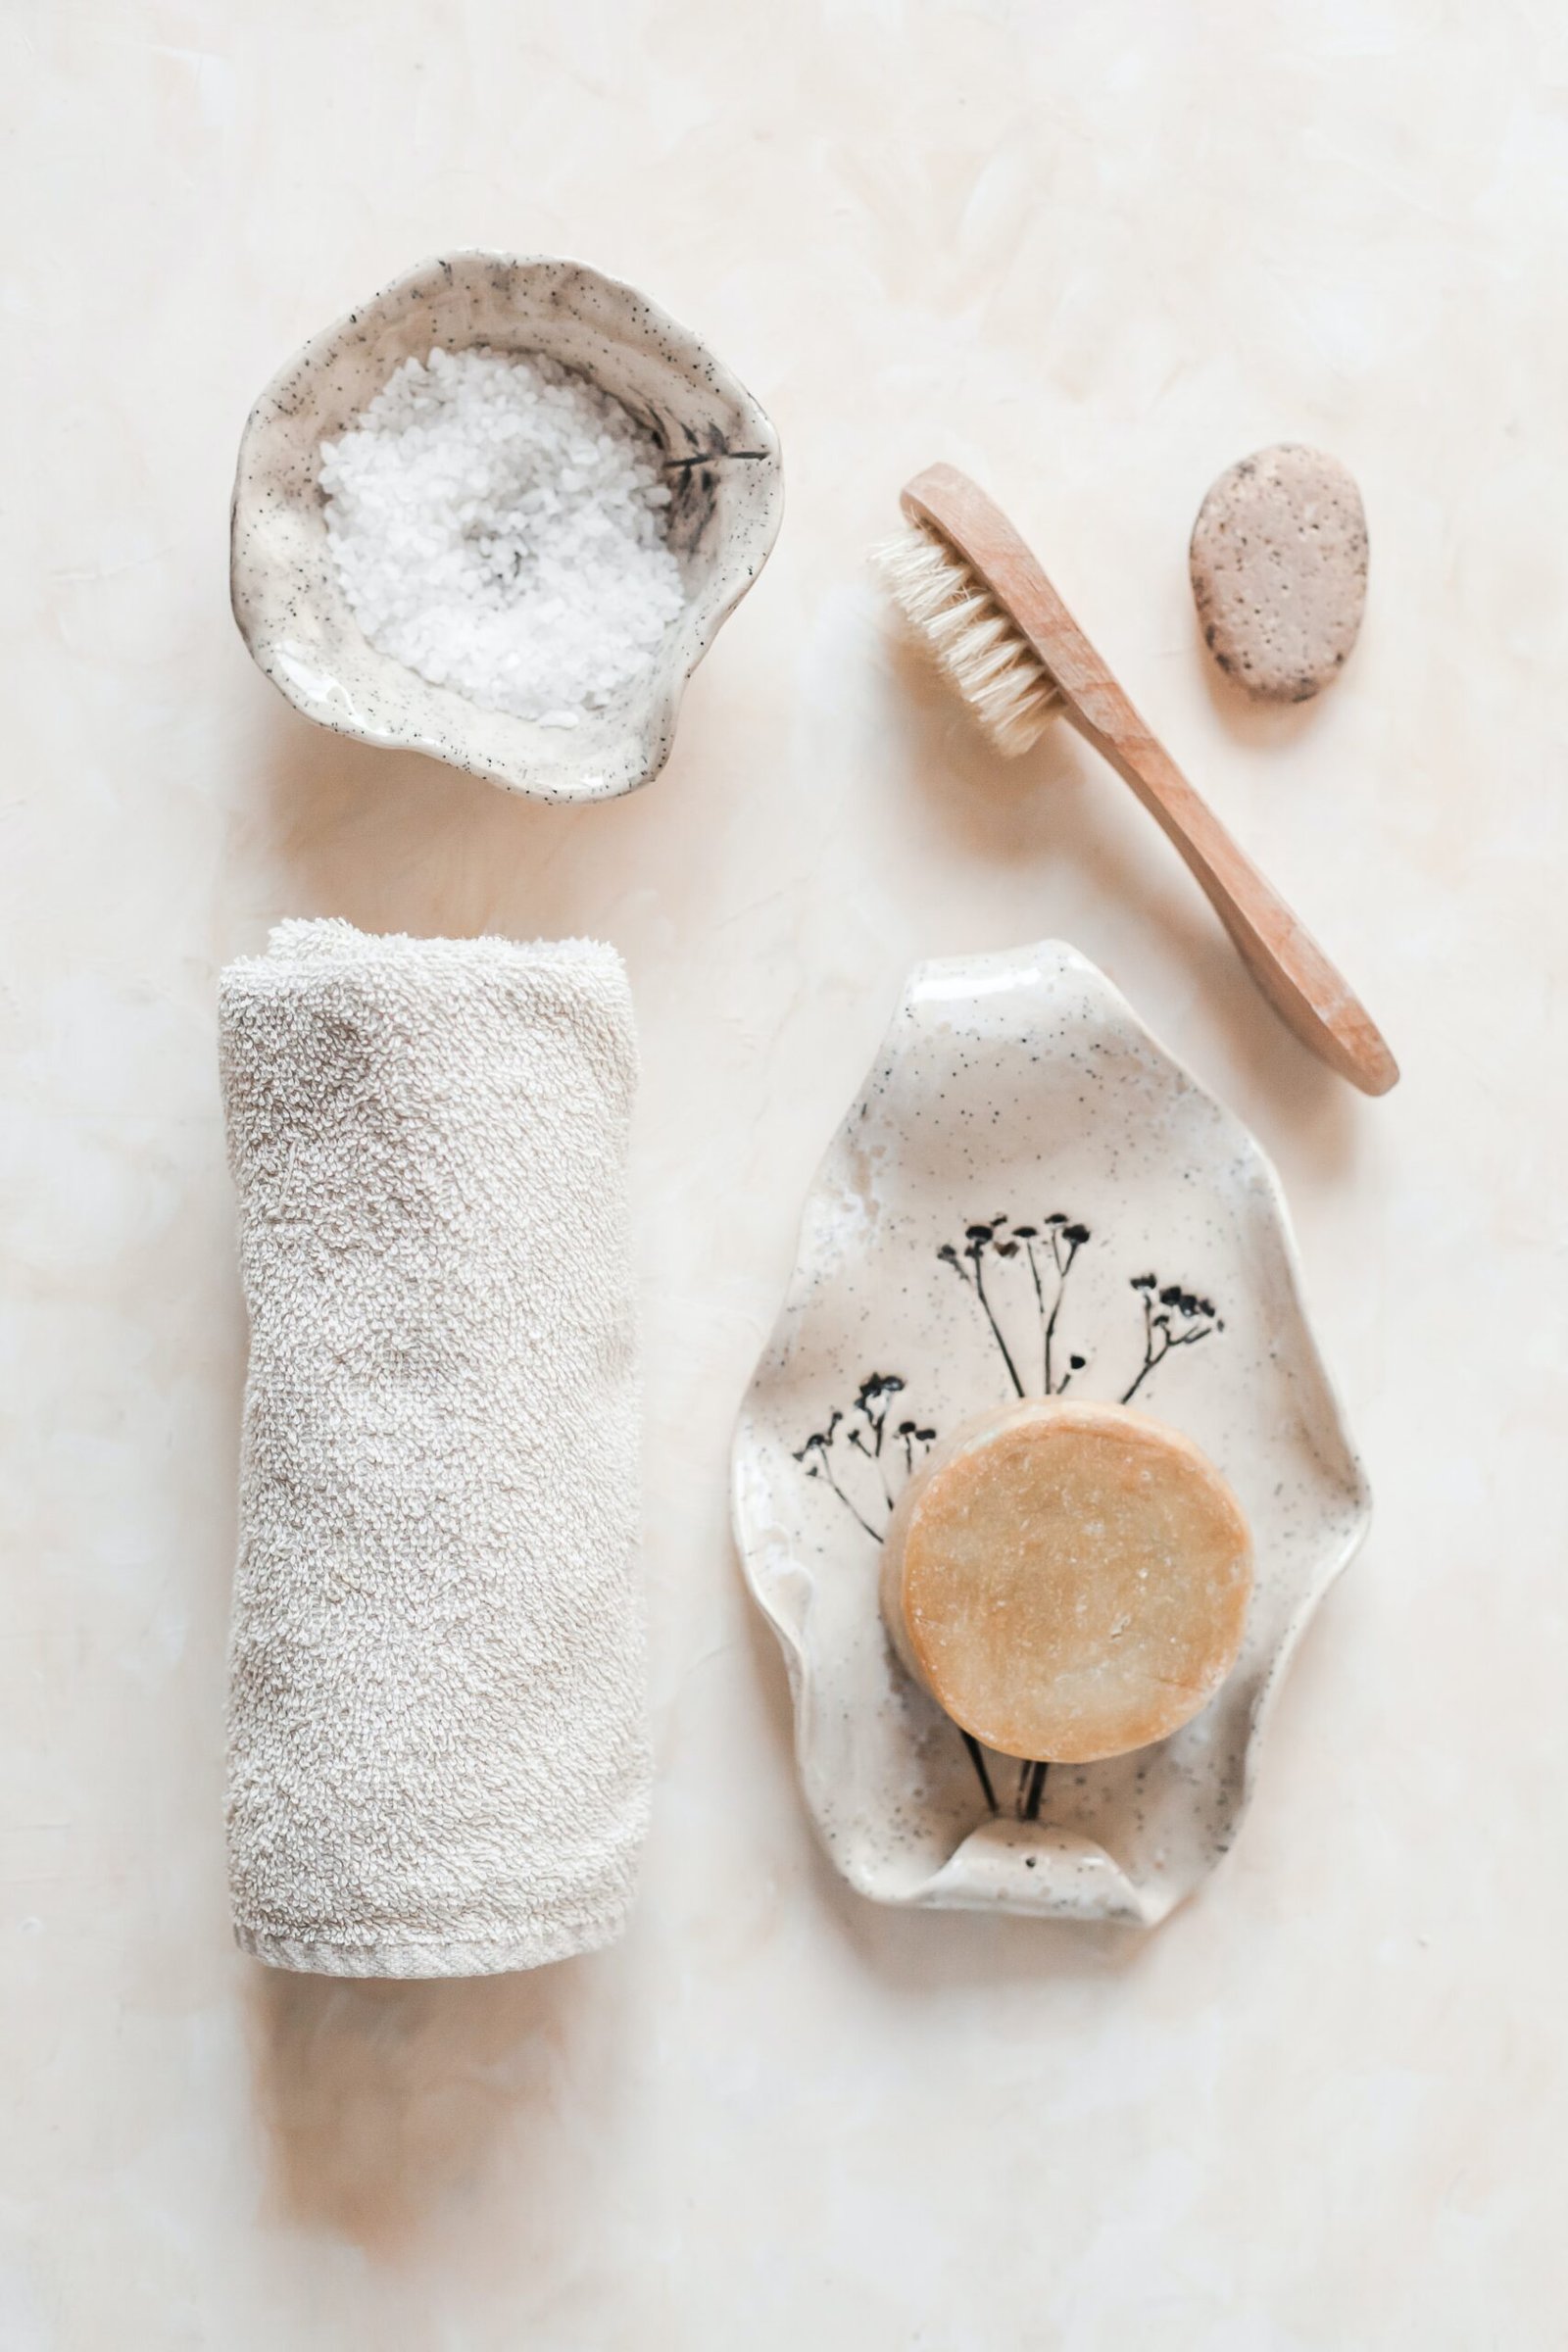 The Importance of Natural Beauty Products